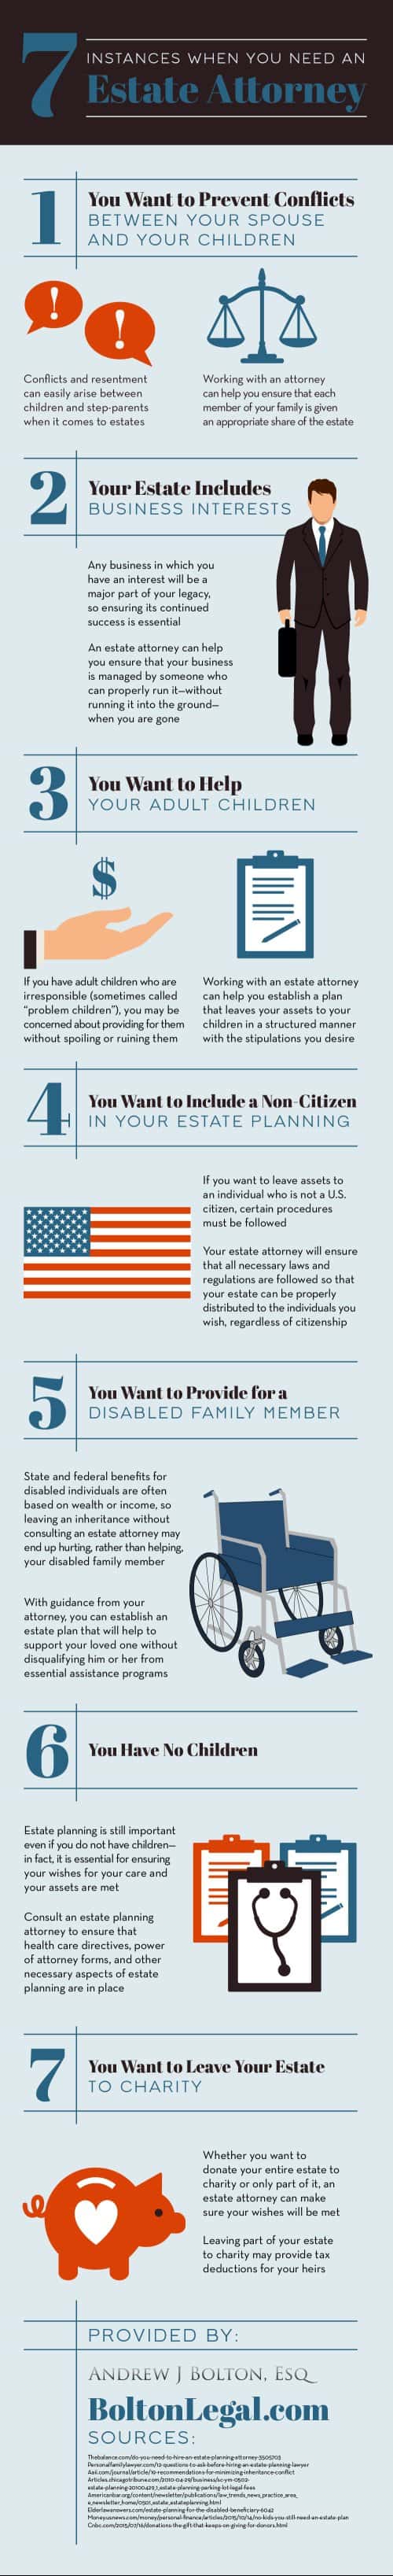 7 Instances When You Need an Estate Attorney [Infographic]